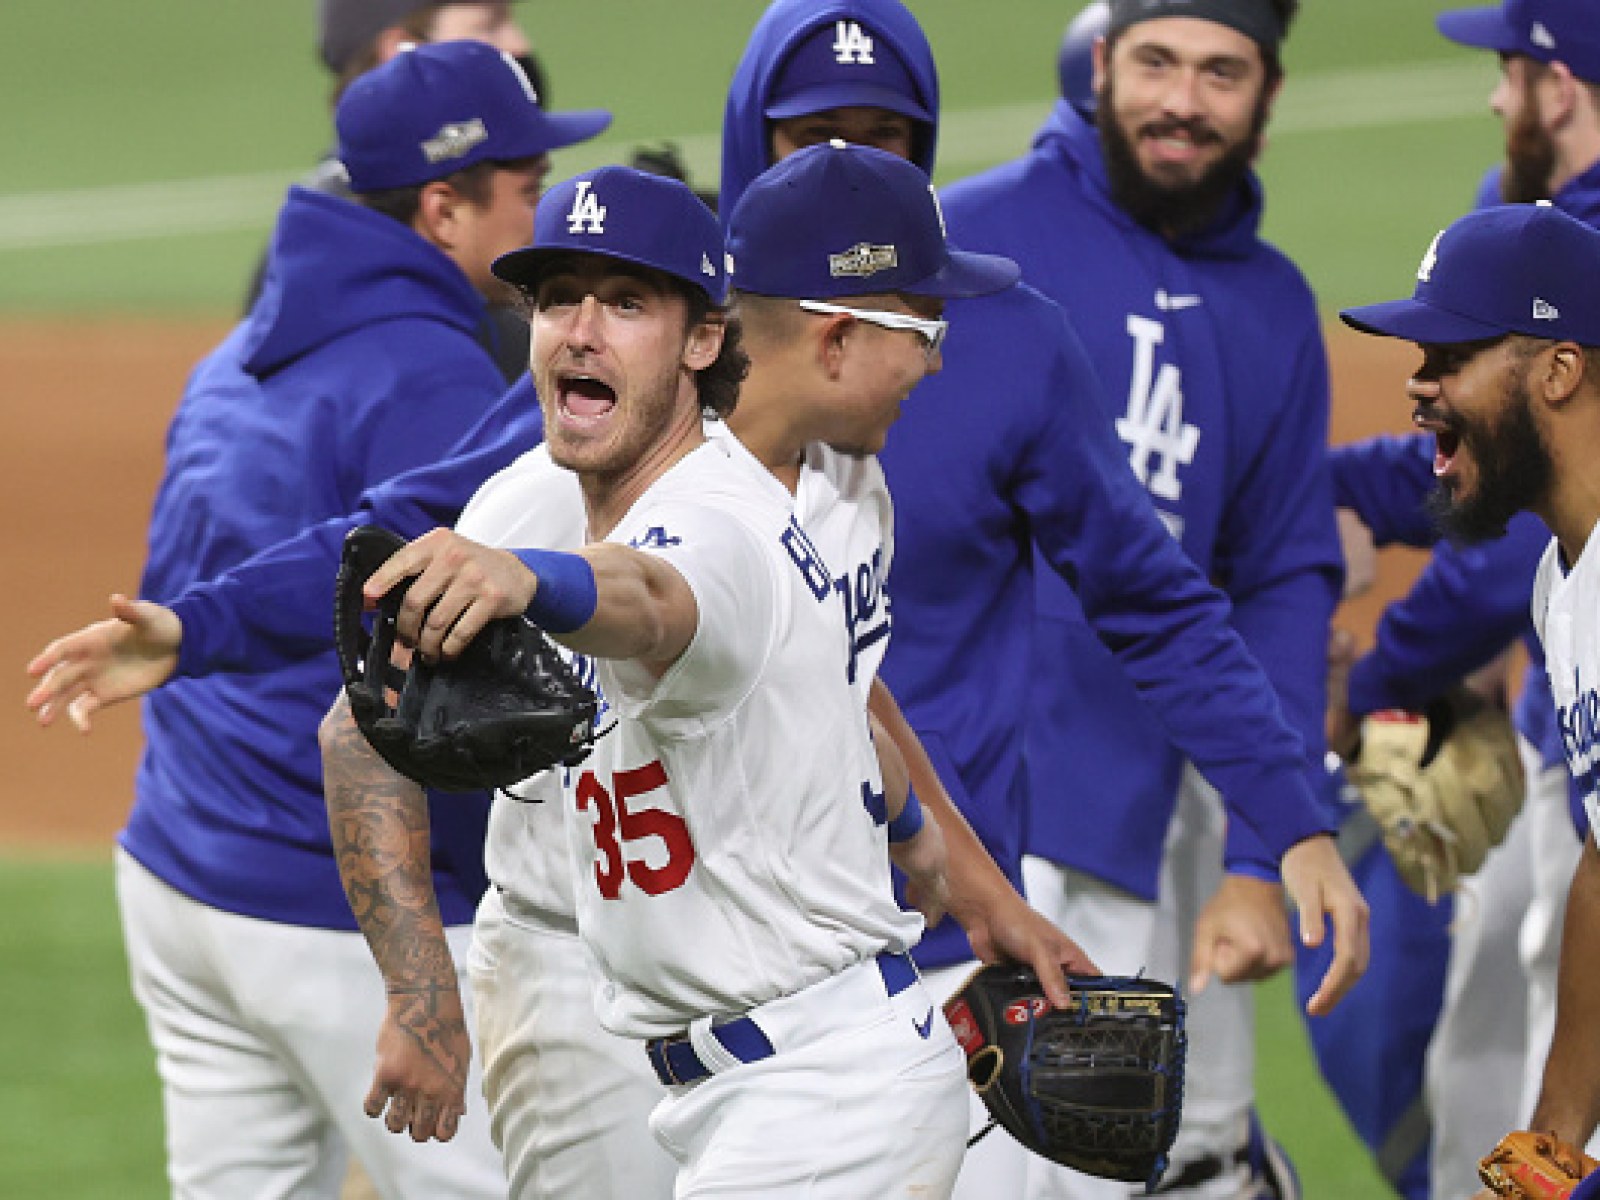 Los angeles dodgers 2020 World Series Champions League MLB dodgers